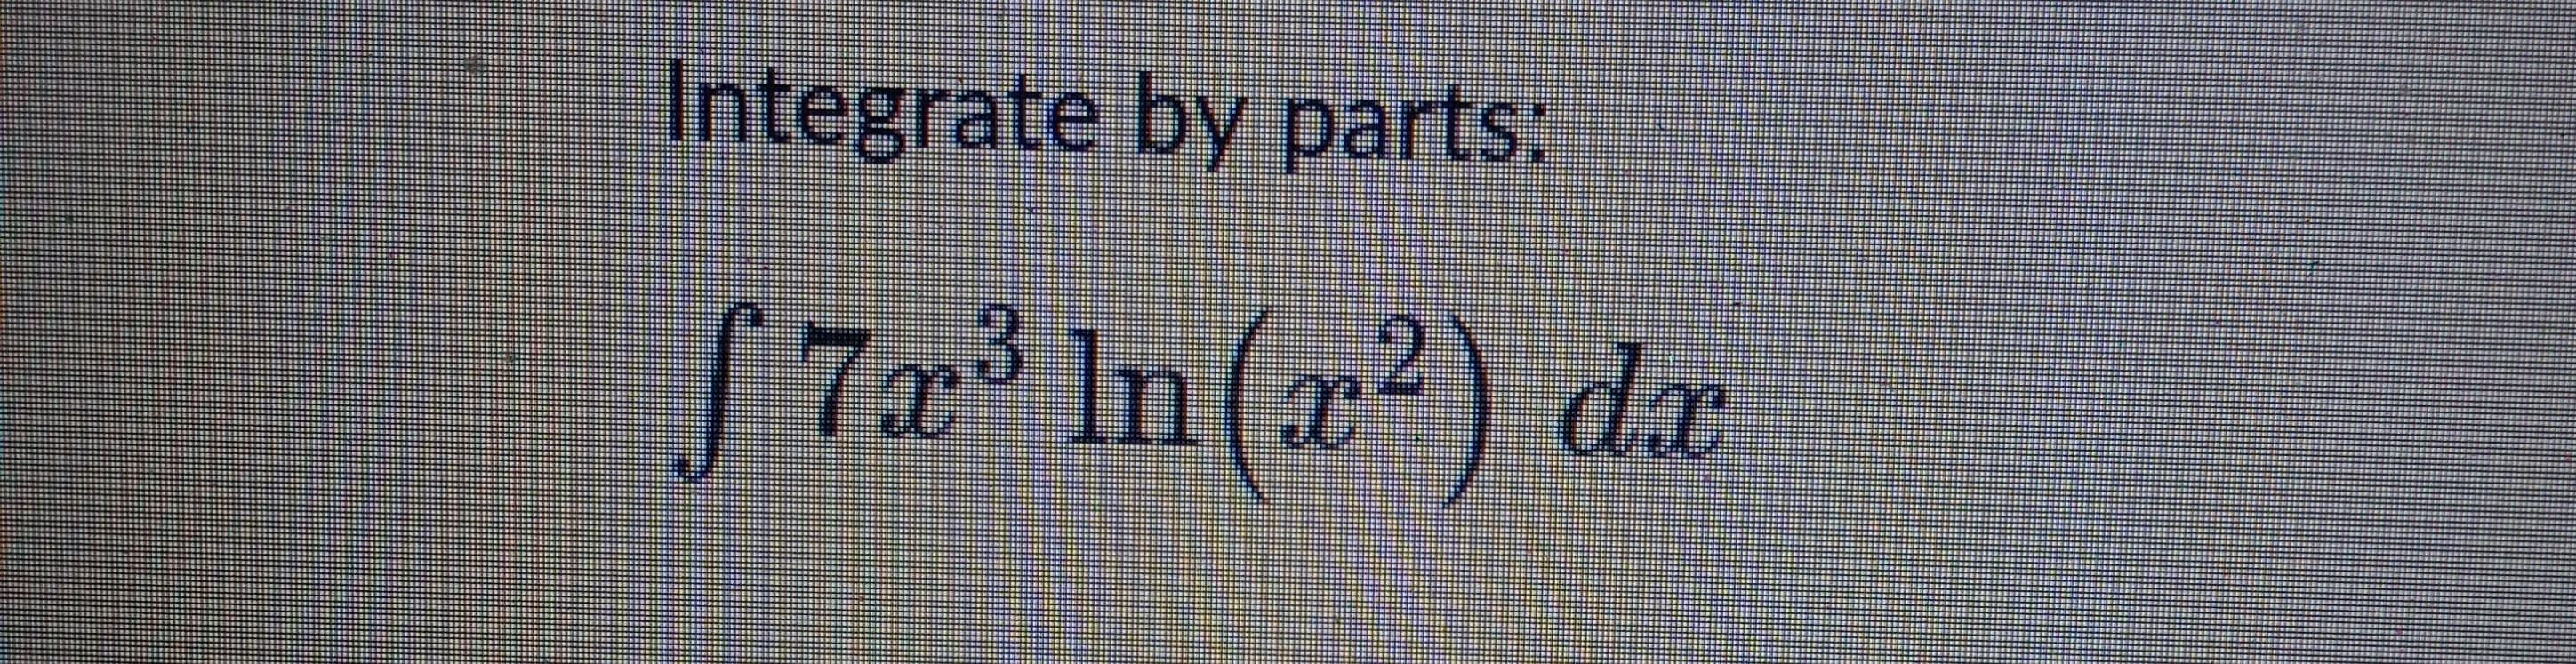 Integrate by parts:
7x In(x²) dx
2
